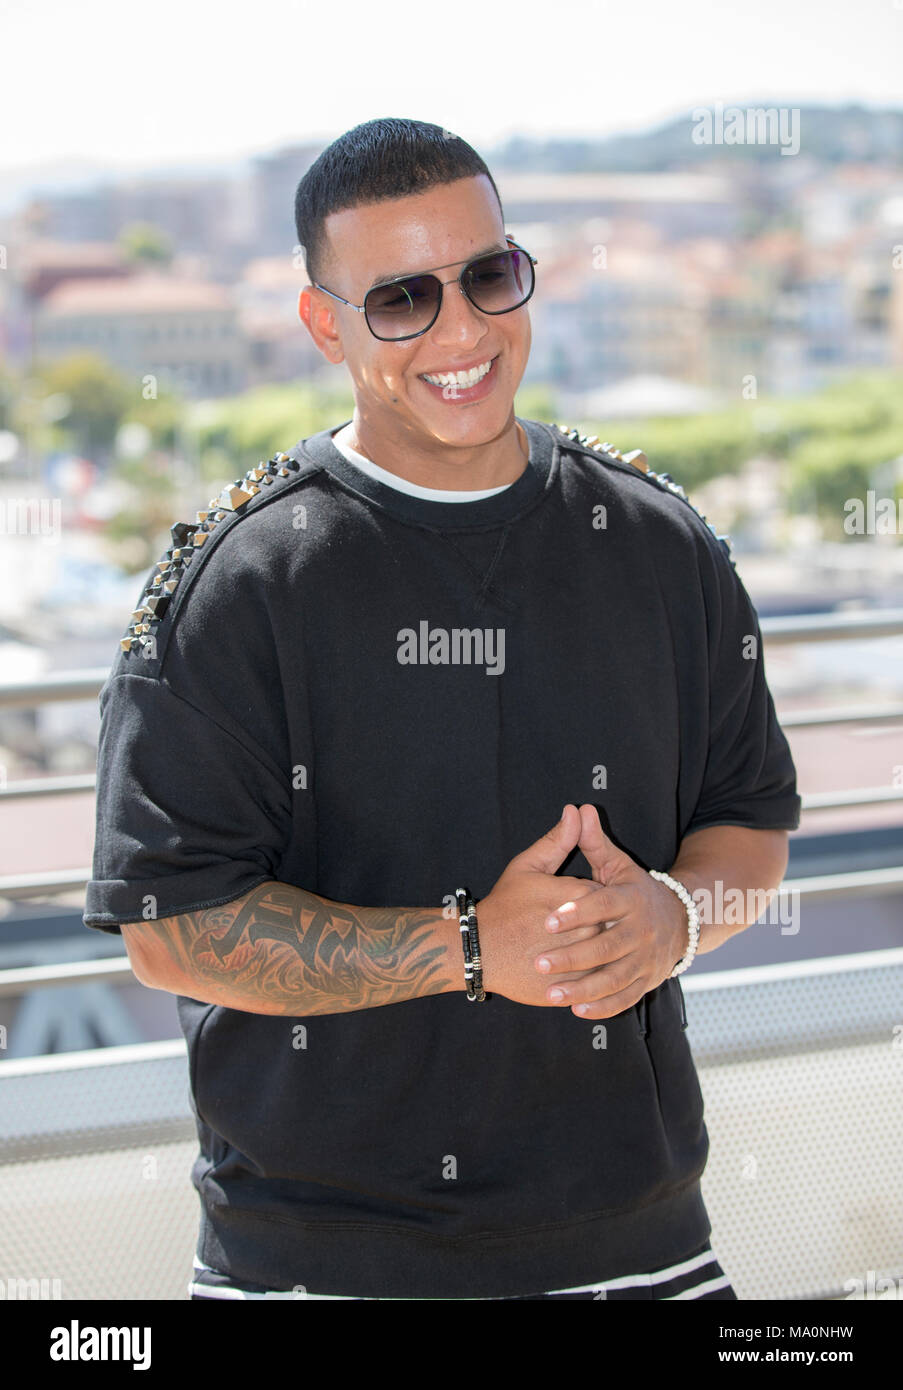 Daddy Yankee singer, songwriter, actor, rapper, and record producer on ‘Despacito’ Success, attend the MIDEM 2017 in Cannes, France, June 6-9  2017 Stock Photo